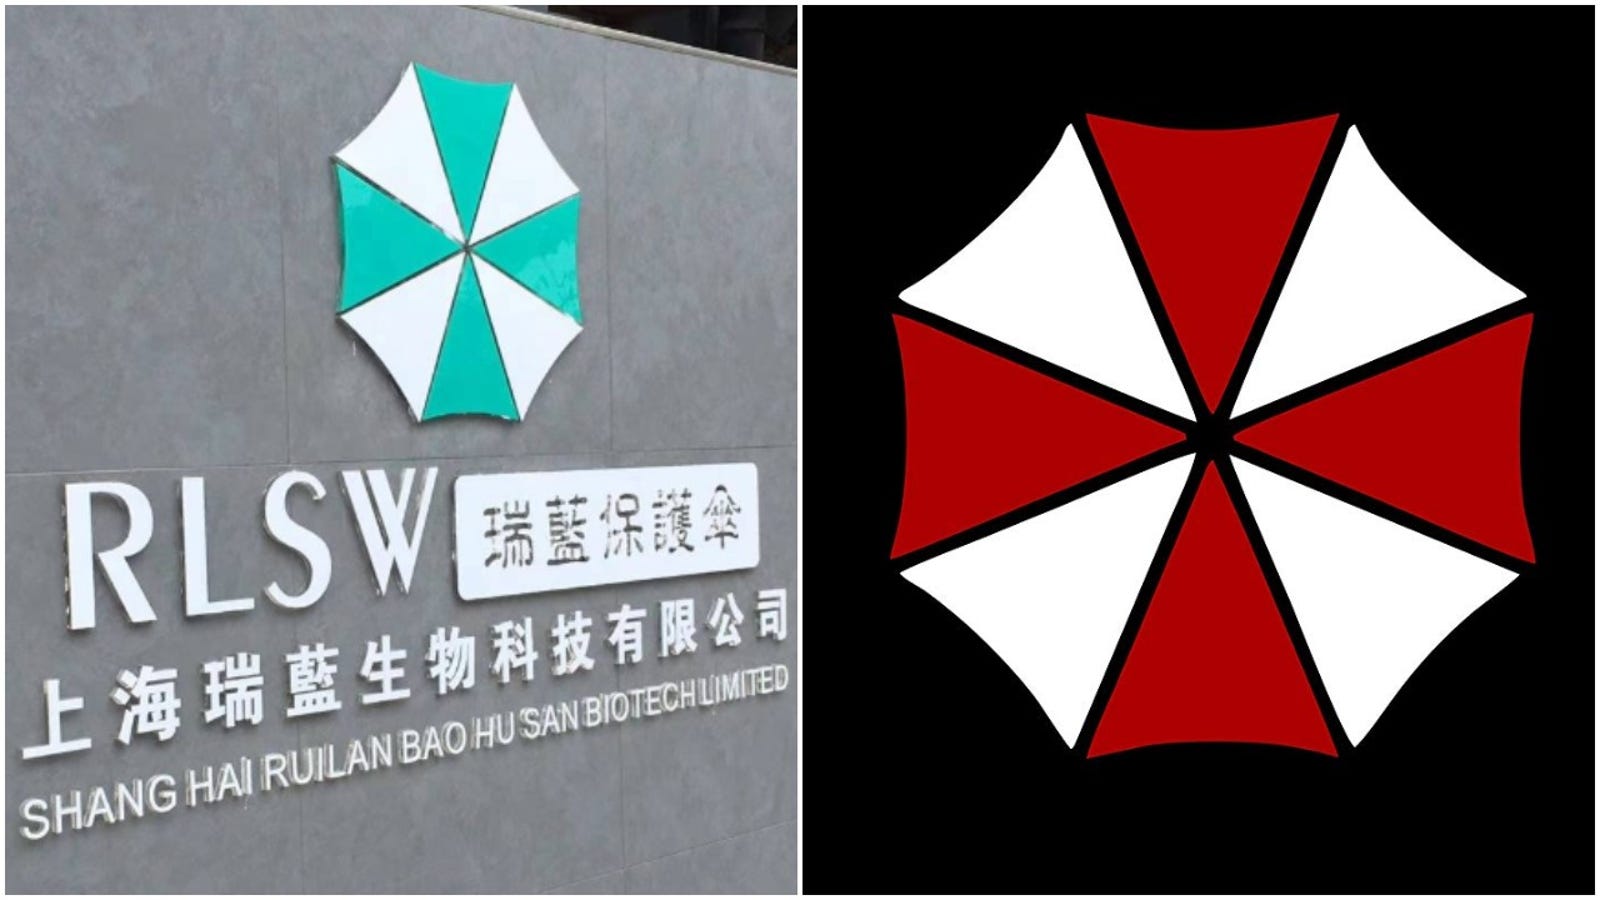 Chinese Resident Evil Fans Think This Biotech Company's Logo Looks Familiar1600 x 900